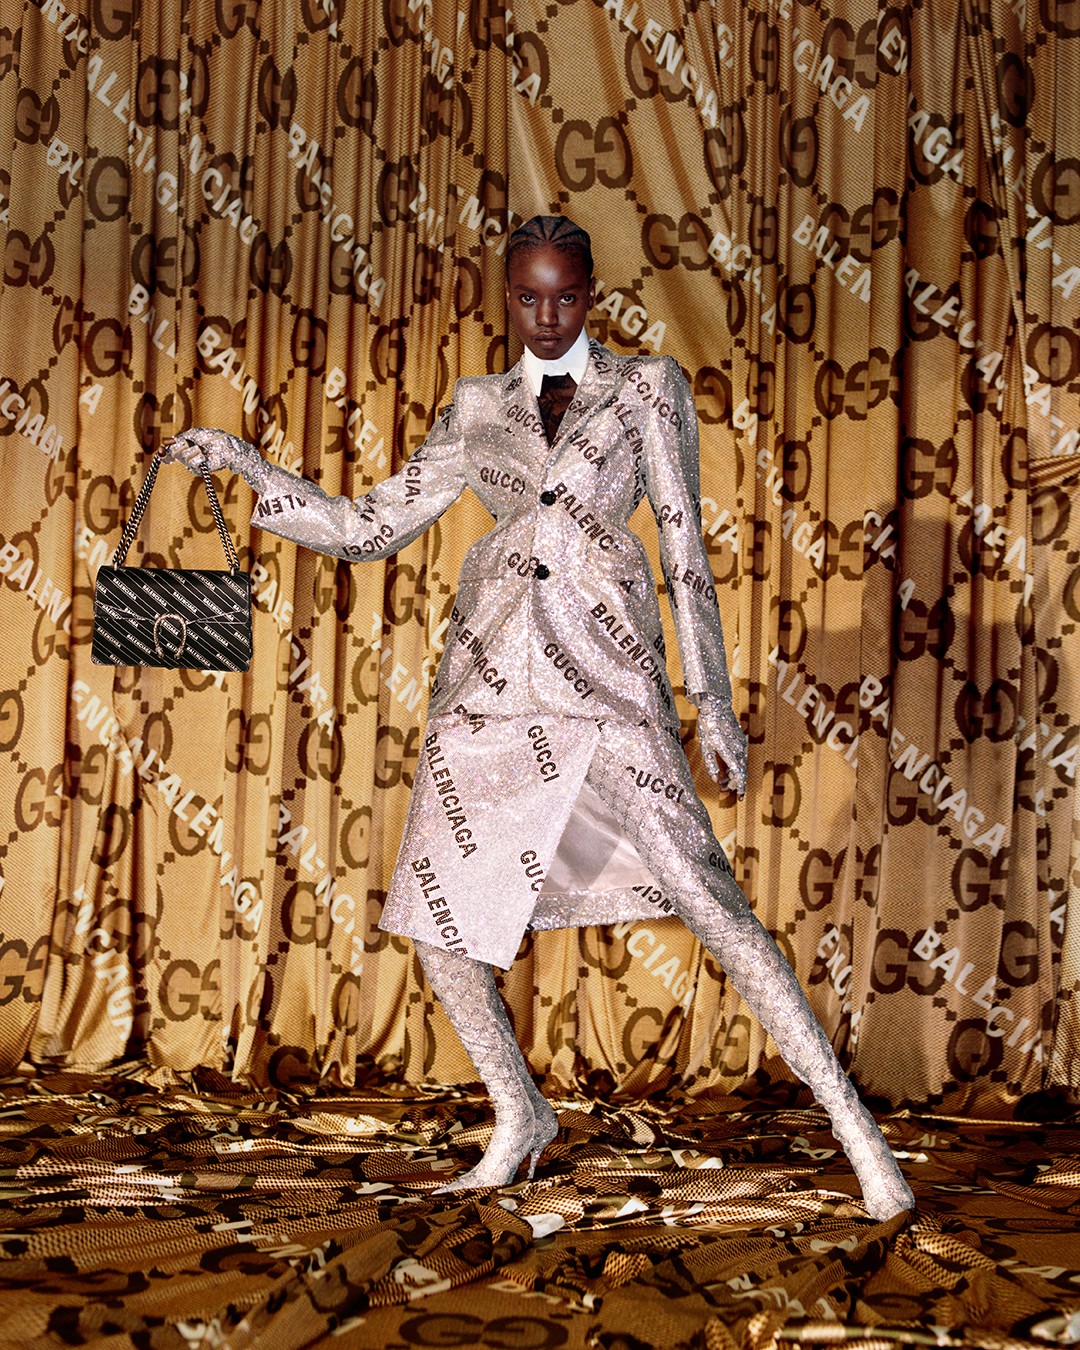 The Hacker Project, Gucci (Foto: Harley Weir)